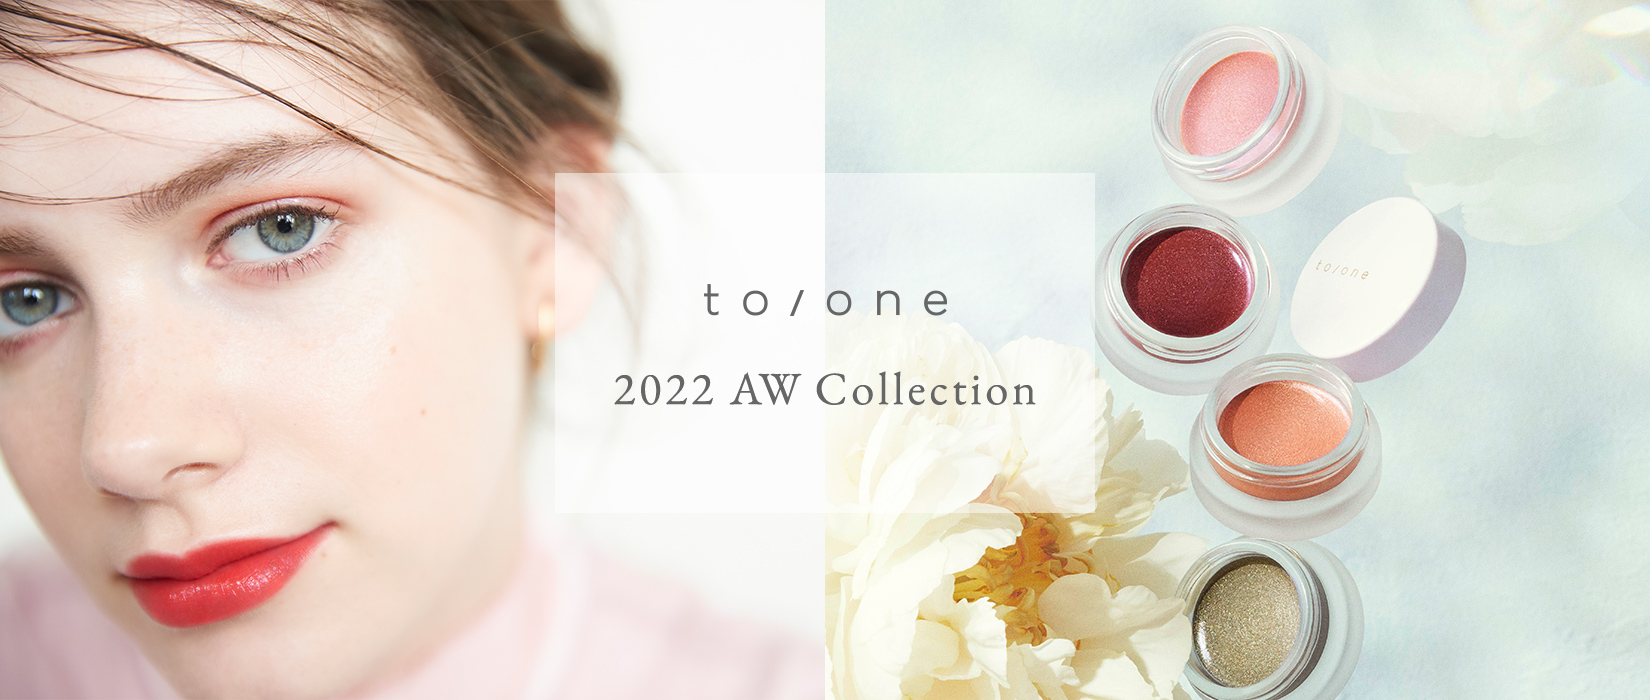 to/one 2022 AW Collection